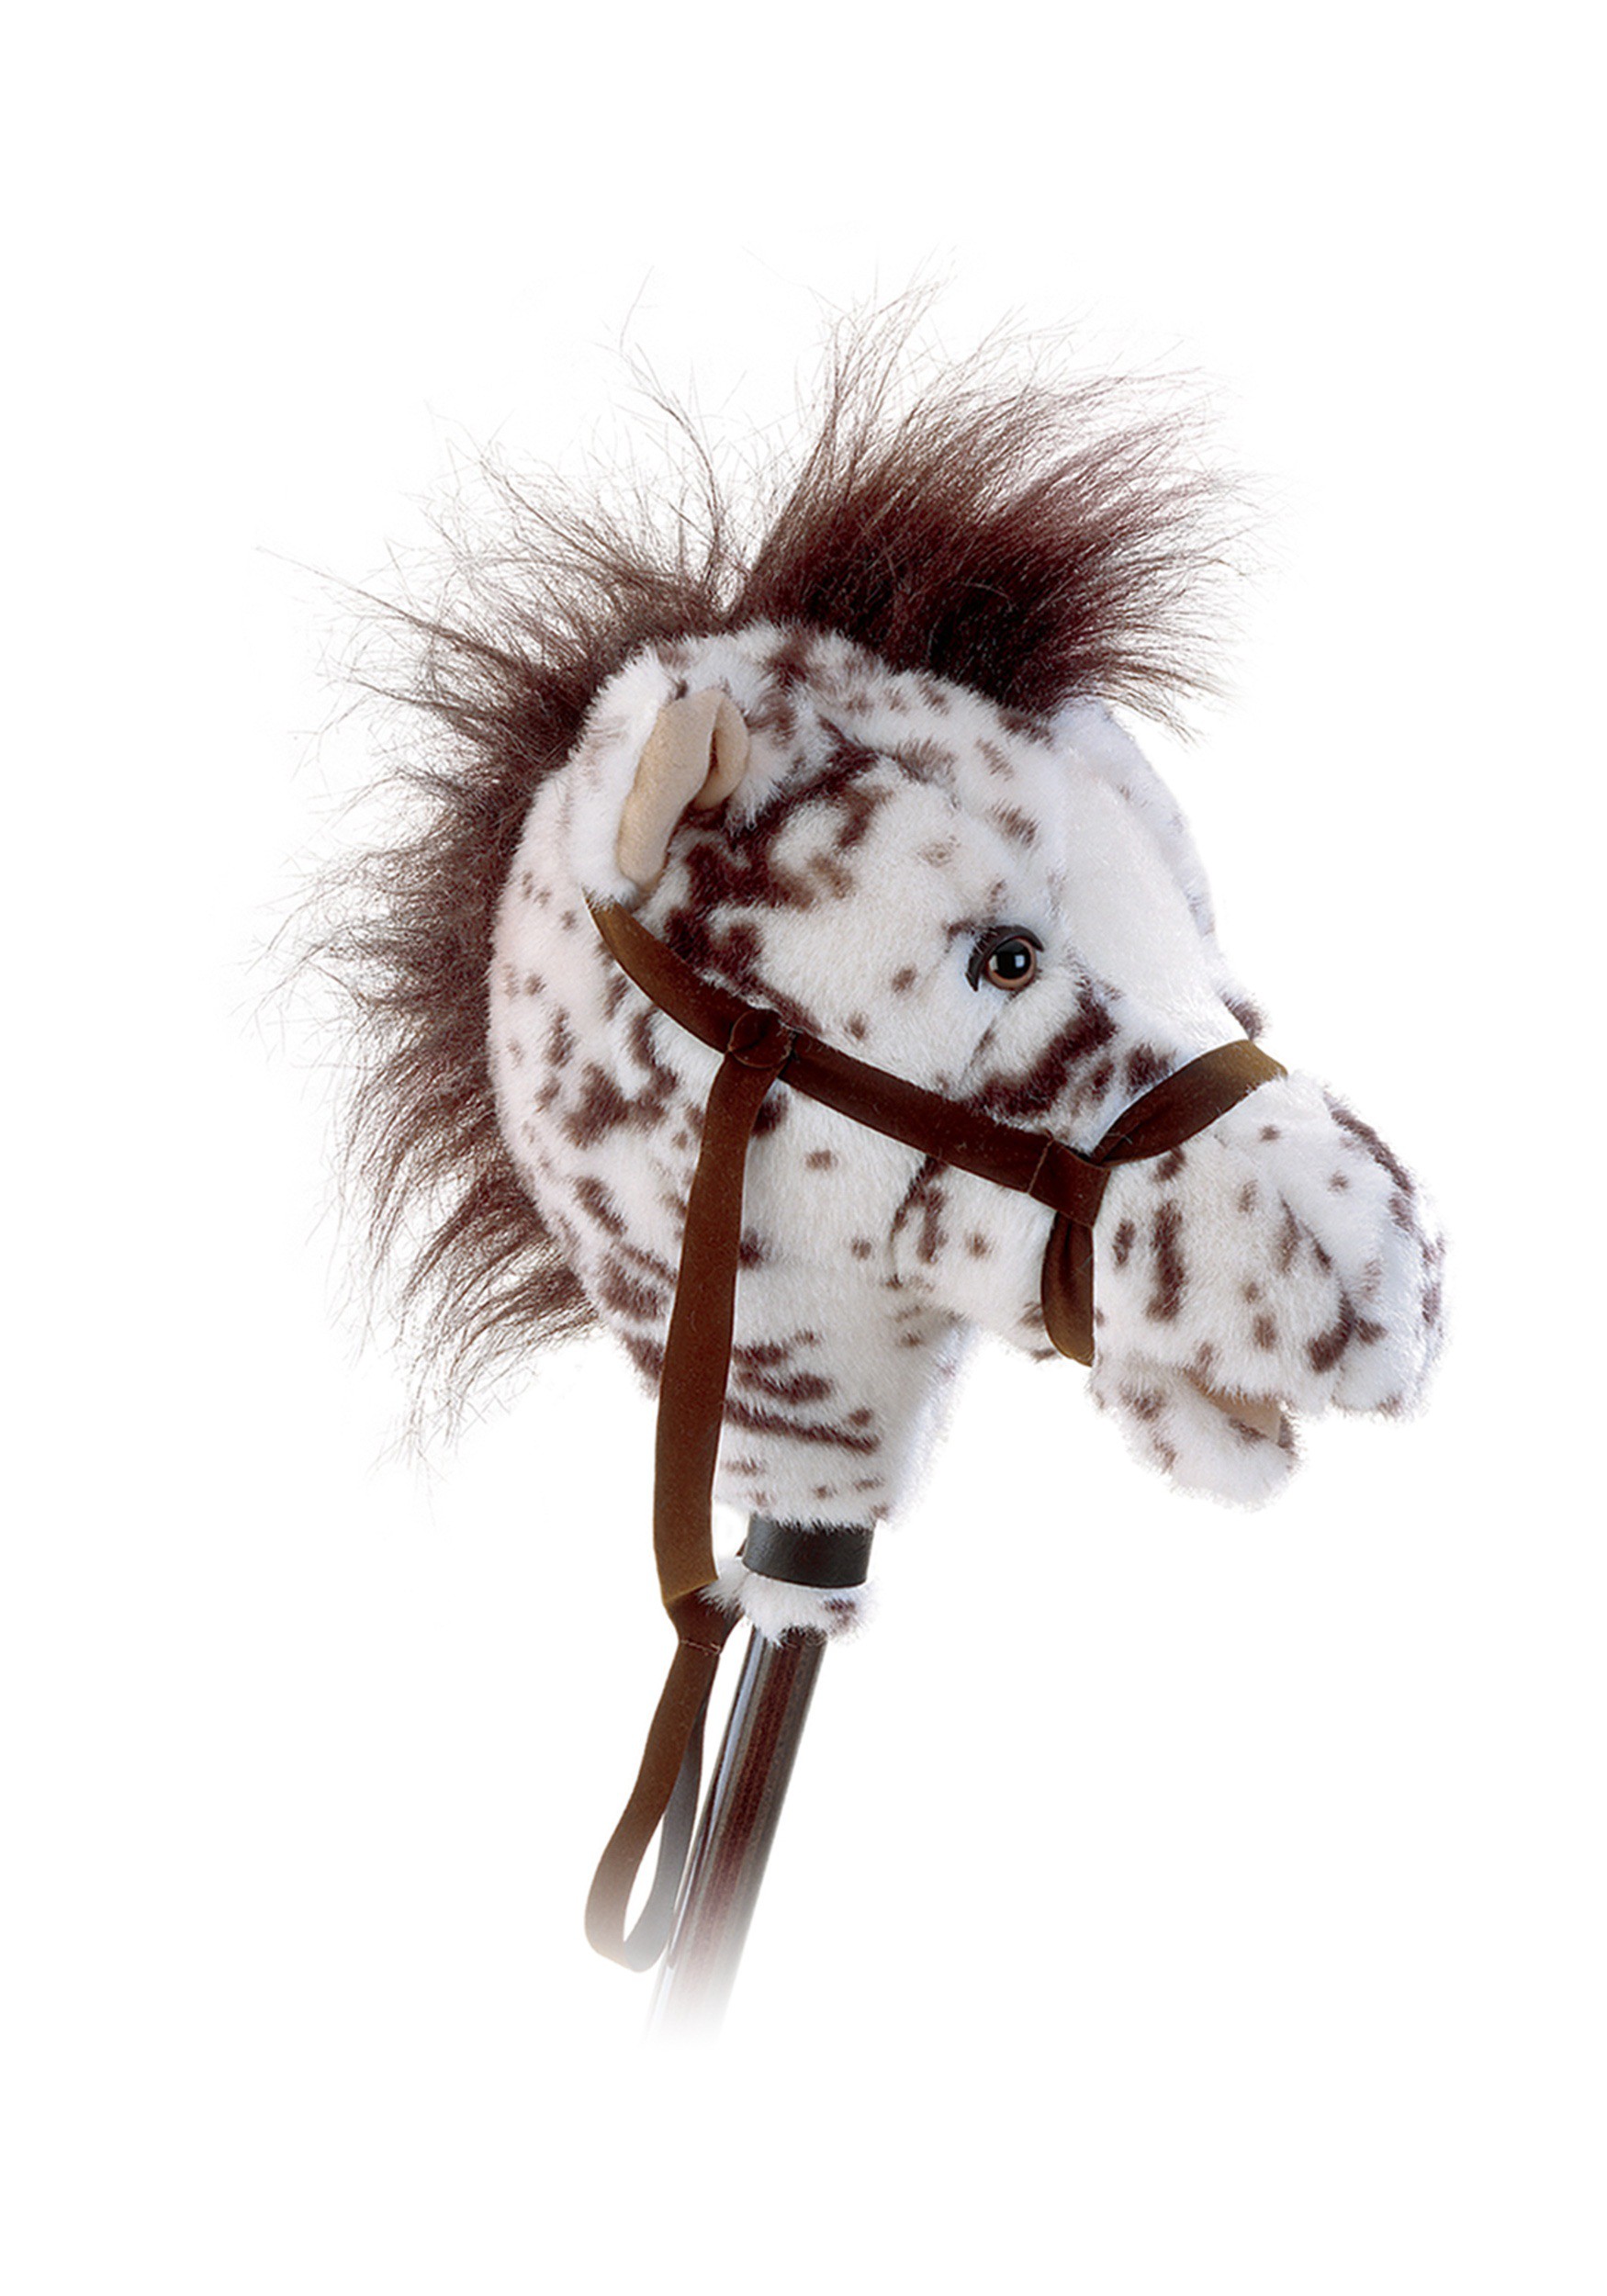 All hobby horses and accessories